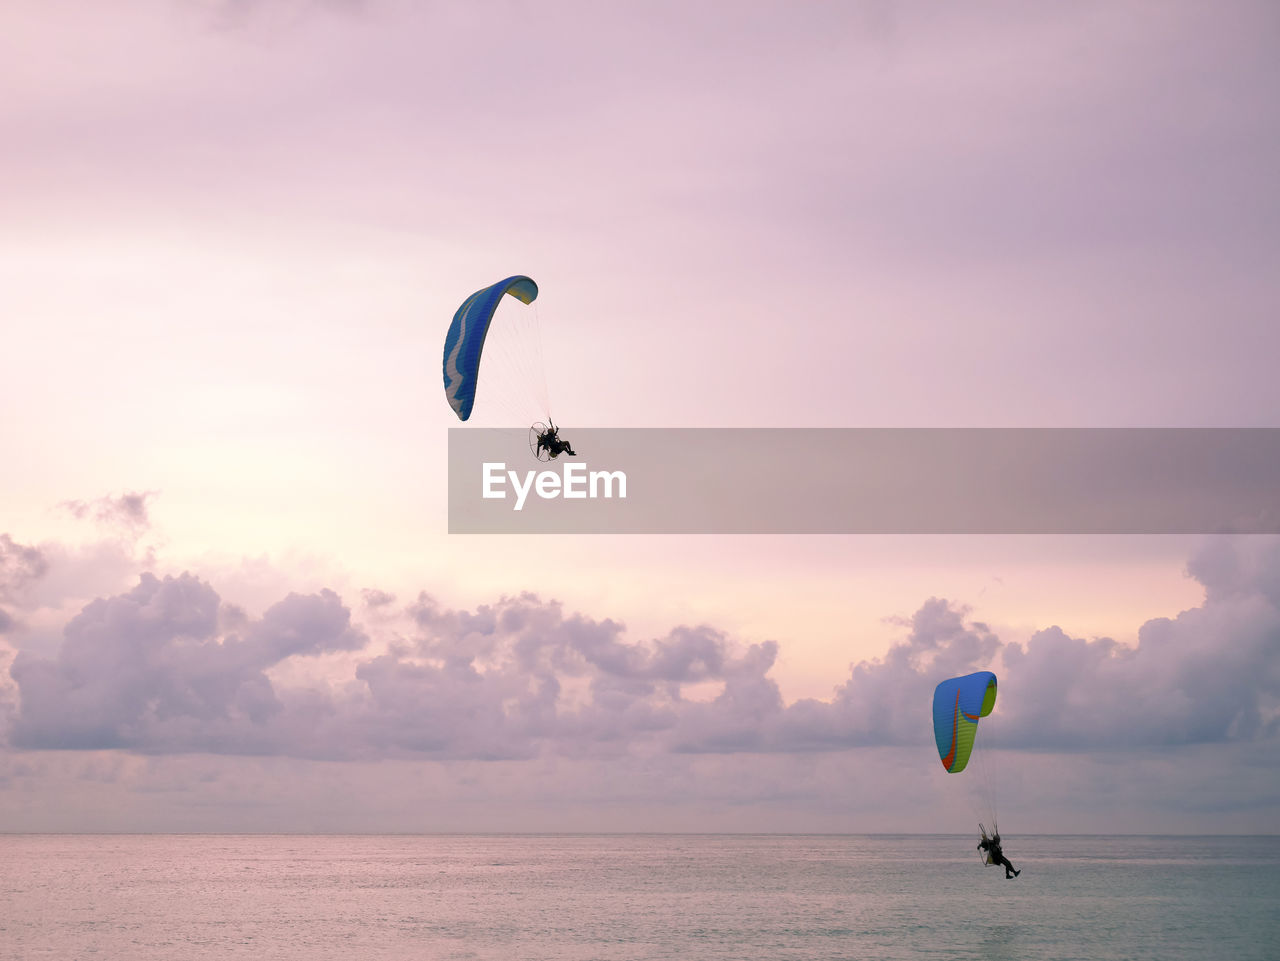 Powered paragliding or paramotor over the sea in evening